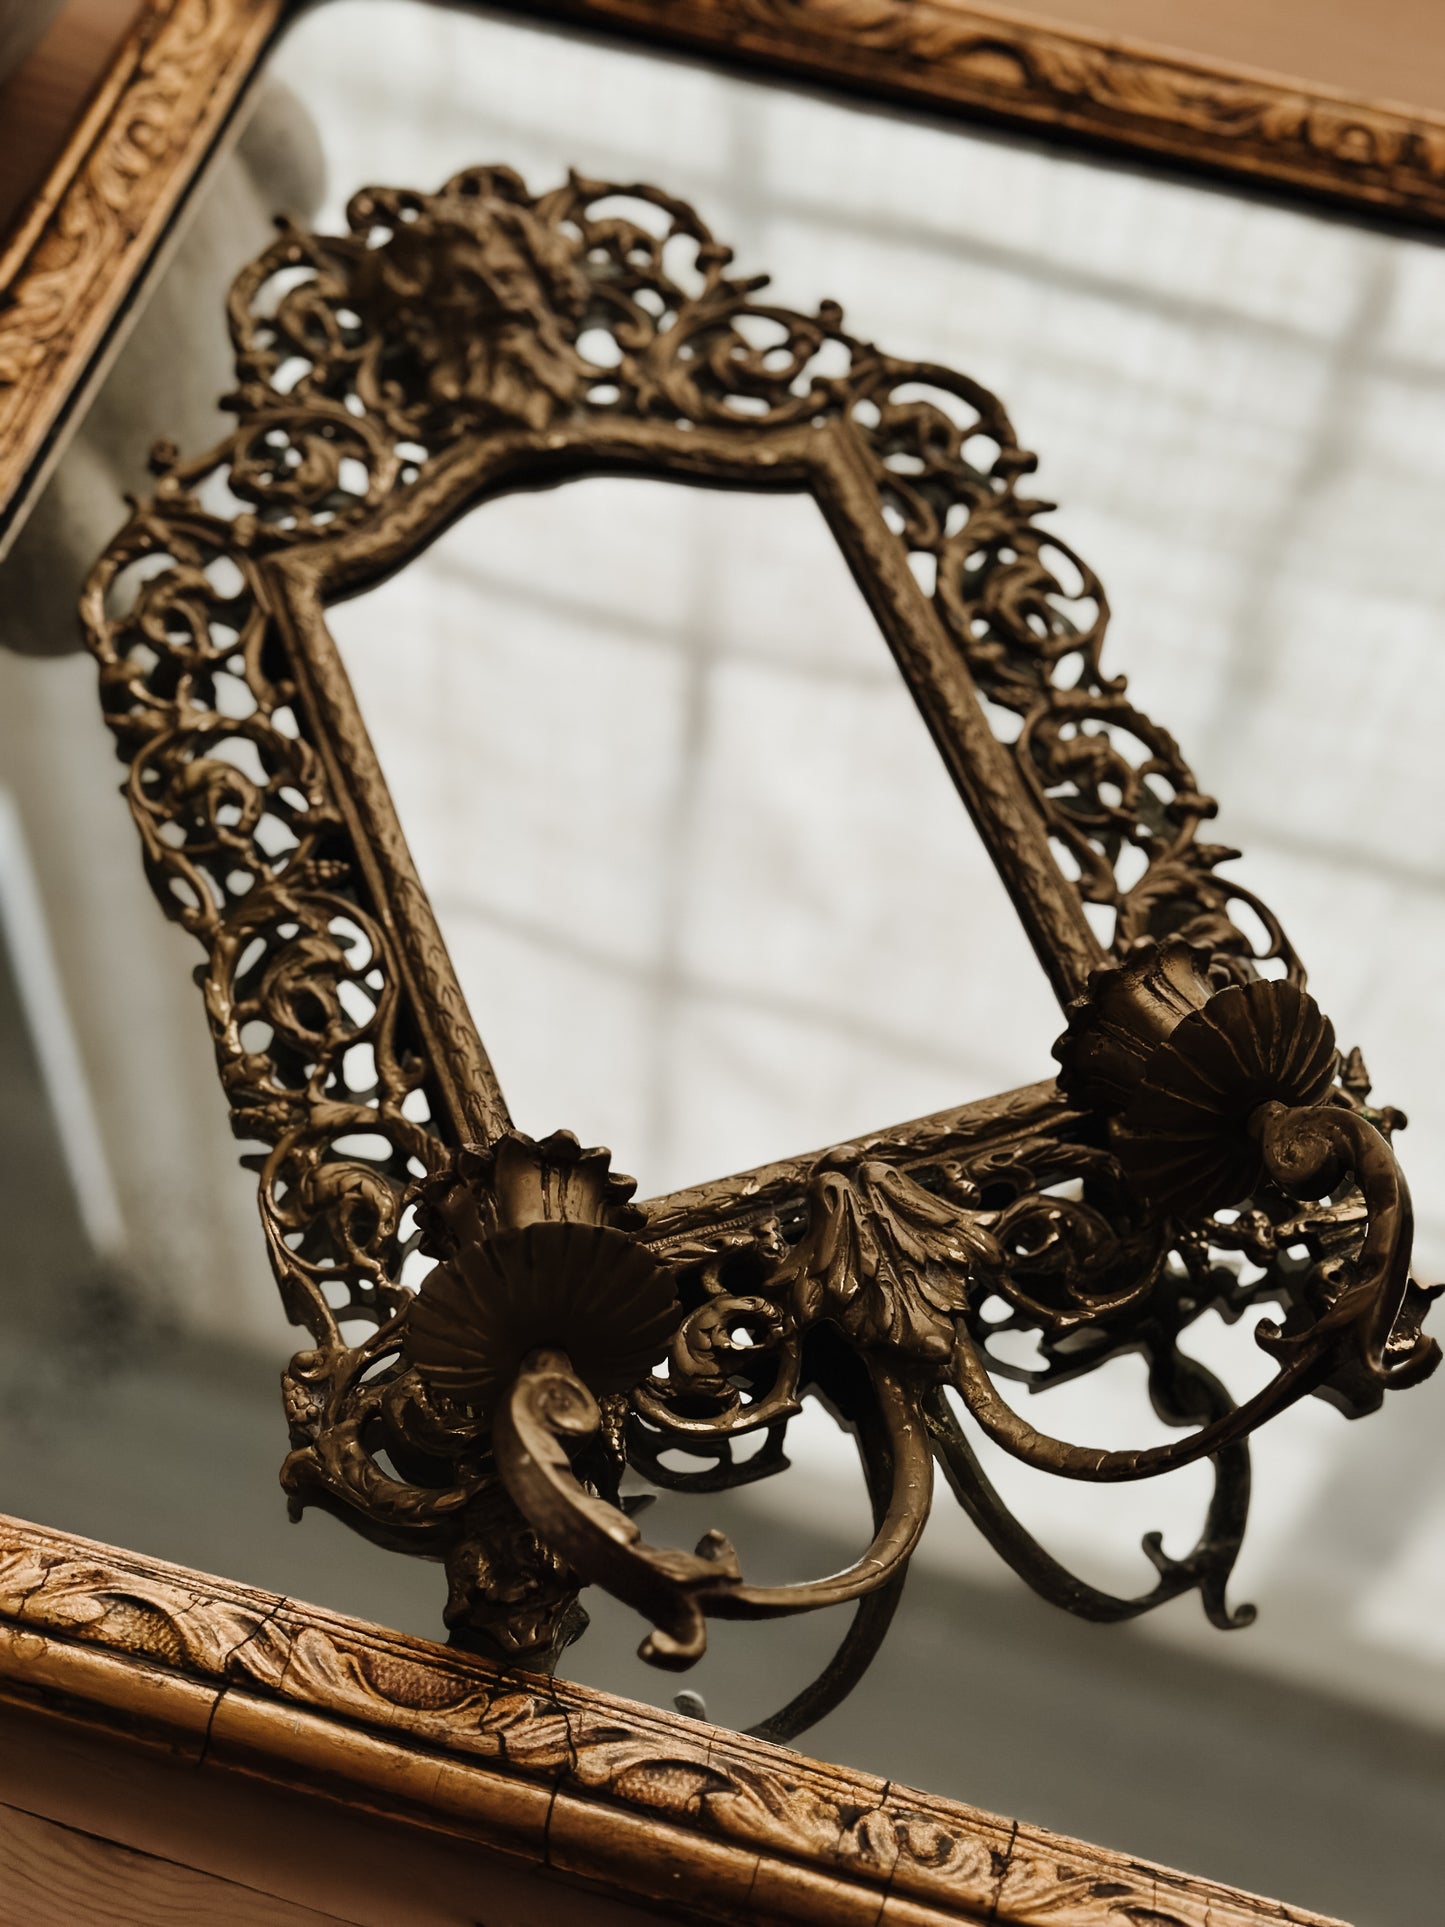 Antique Brass Mirror Wall Scone with Candleholders